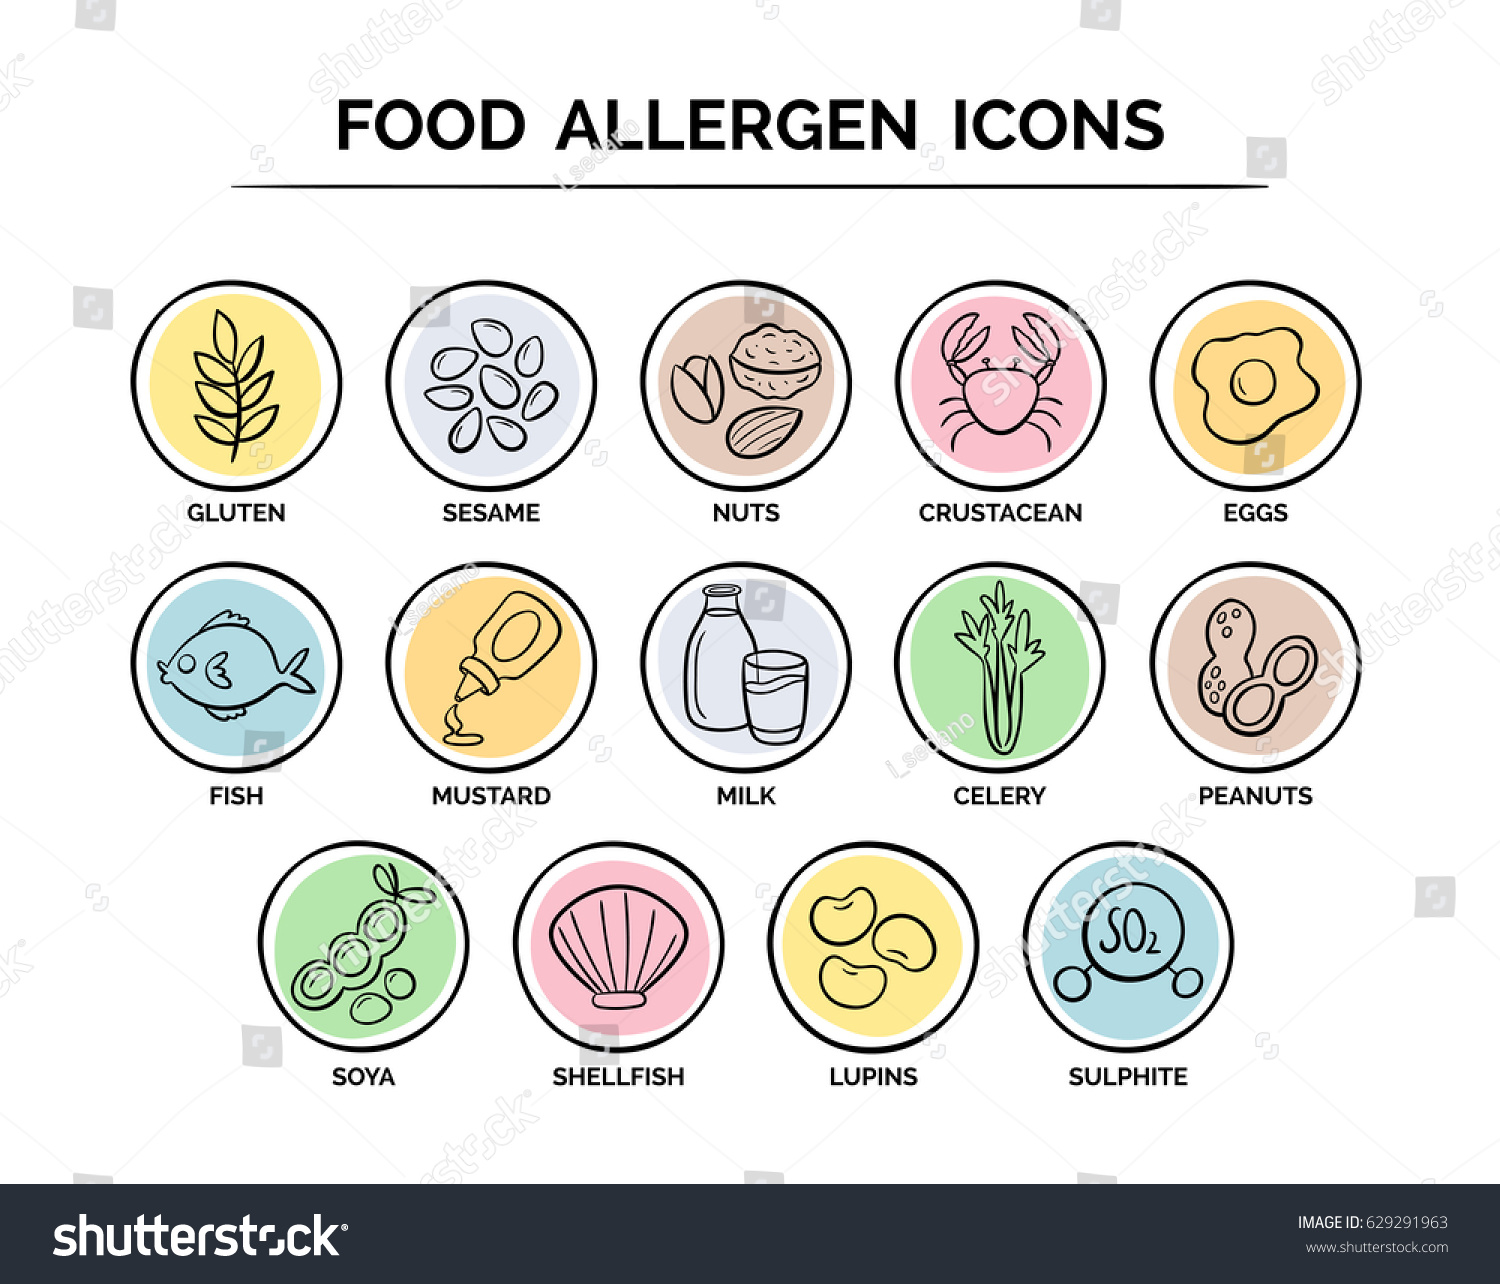 SVG of Food allergen icons set. 14 food ingredients that must be declared as allergens in the EU. Useful for restaurants and meals. Hand drawn doodle version. svg